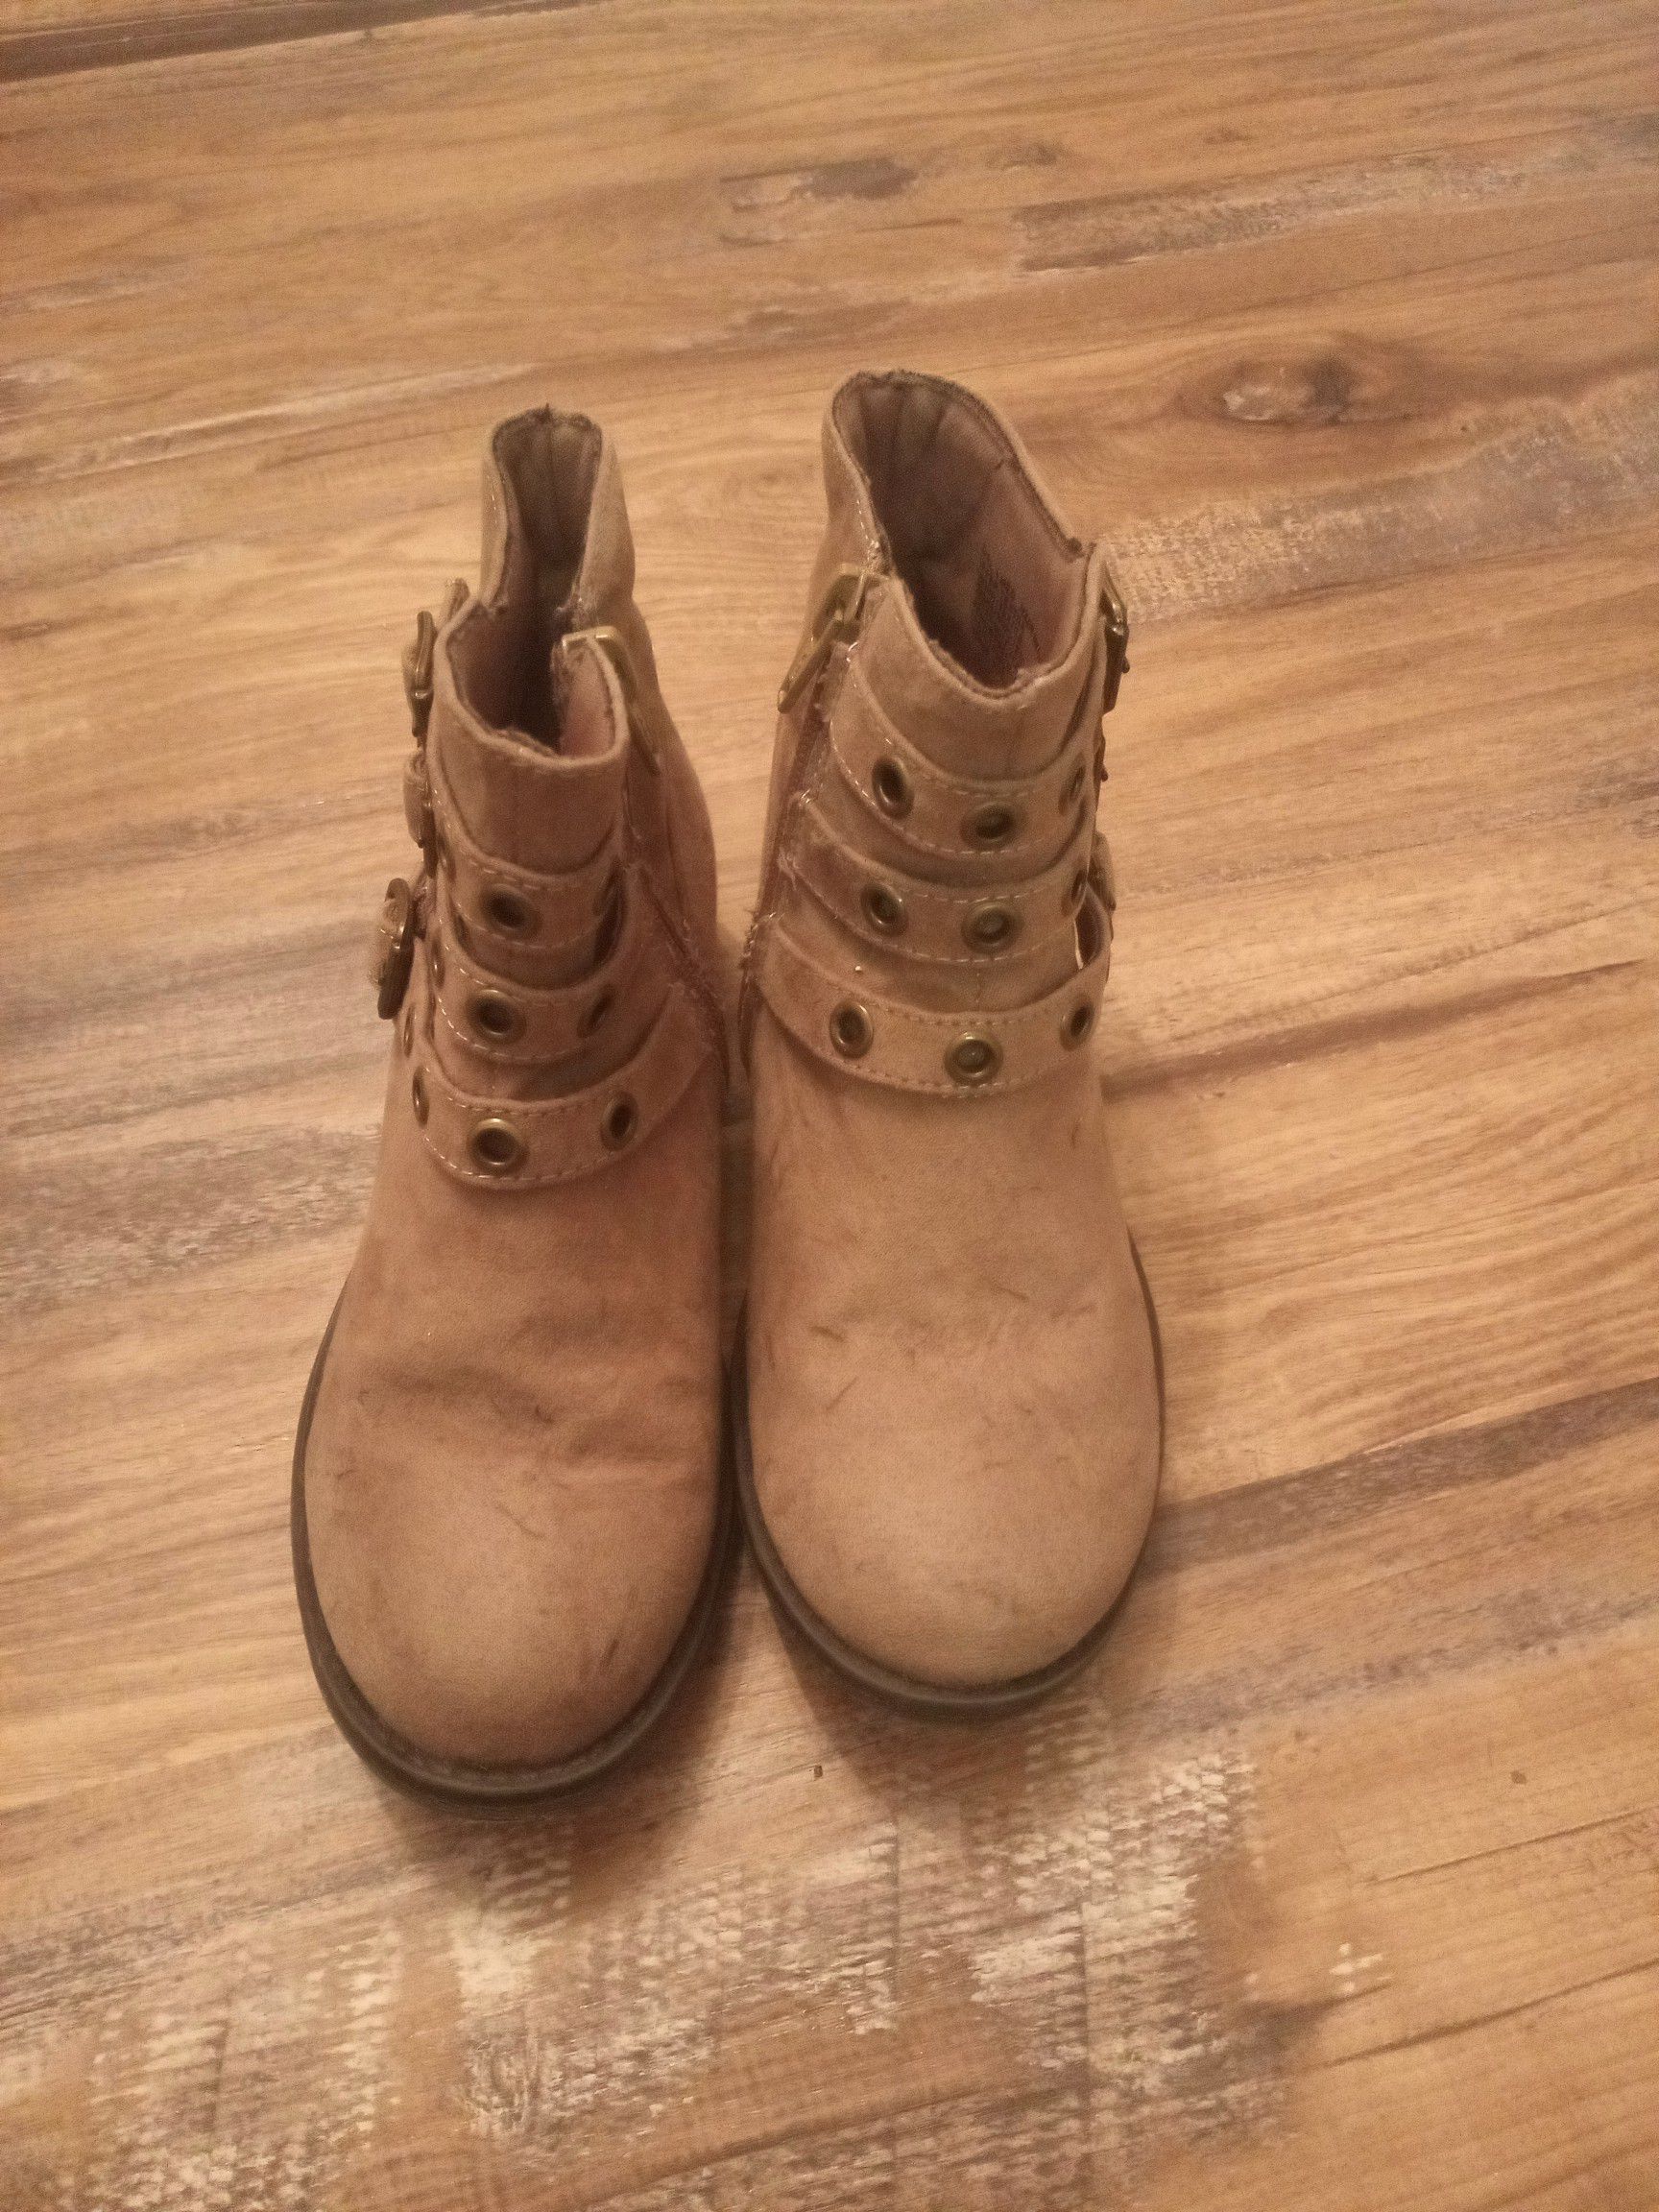 Girls size 1 boots